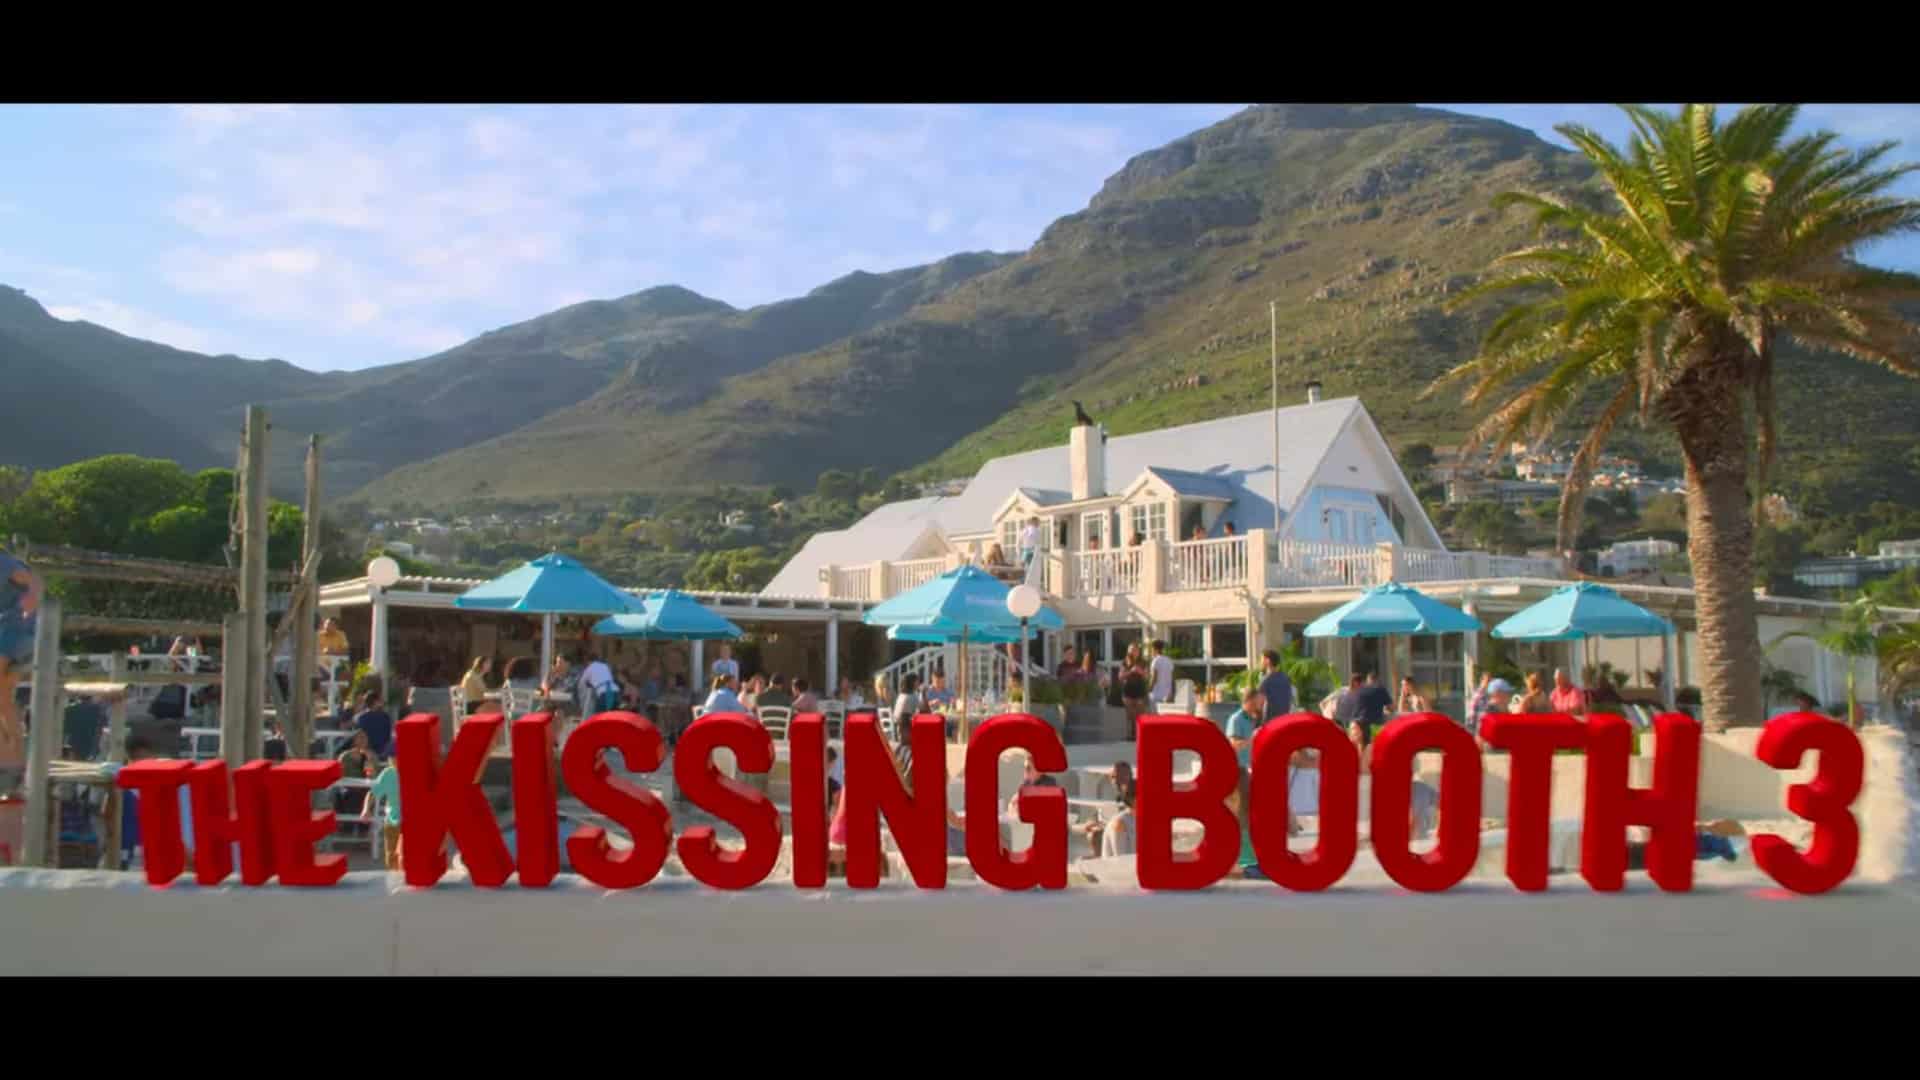 The Kissing Booth 3 – Review/Summary (with Spoilers)